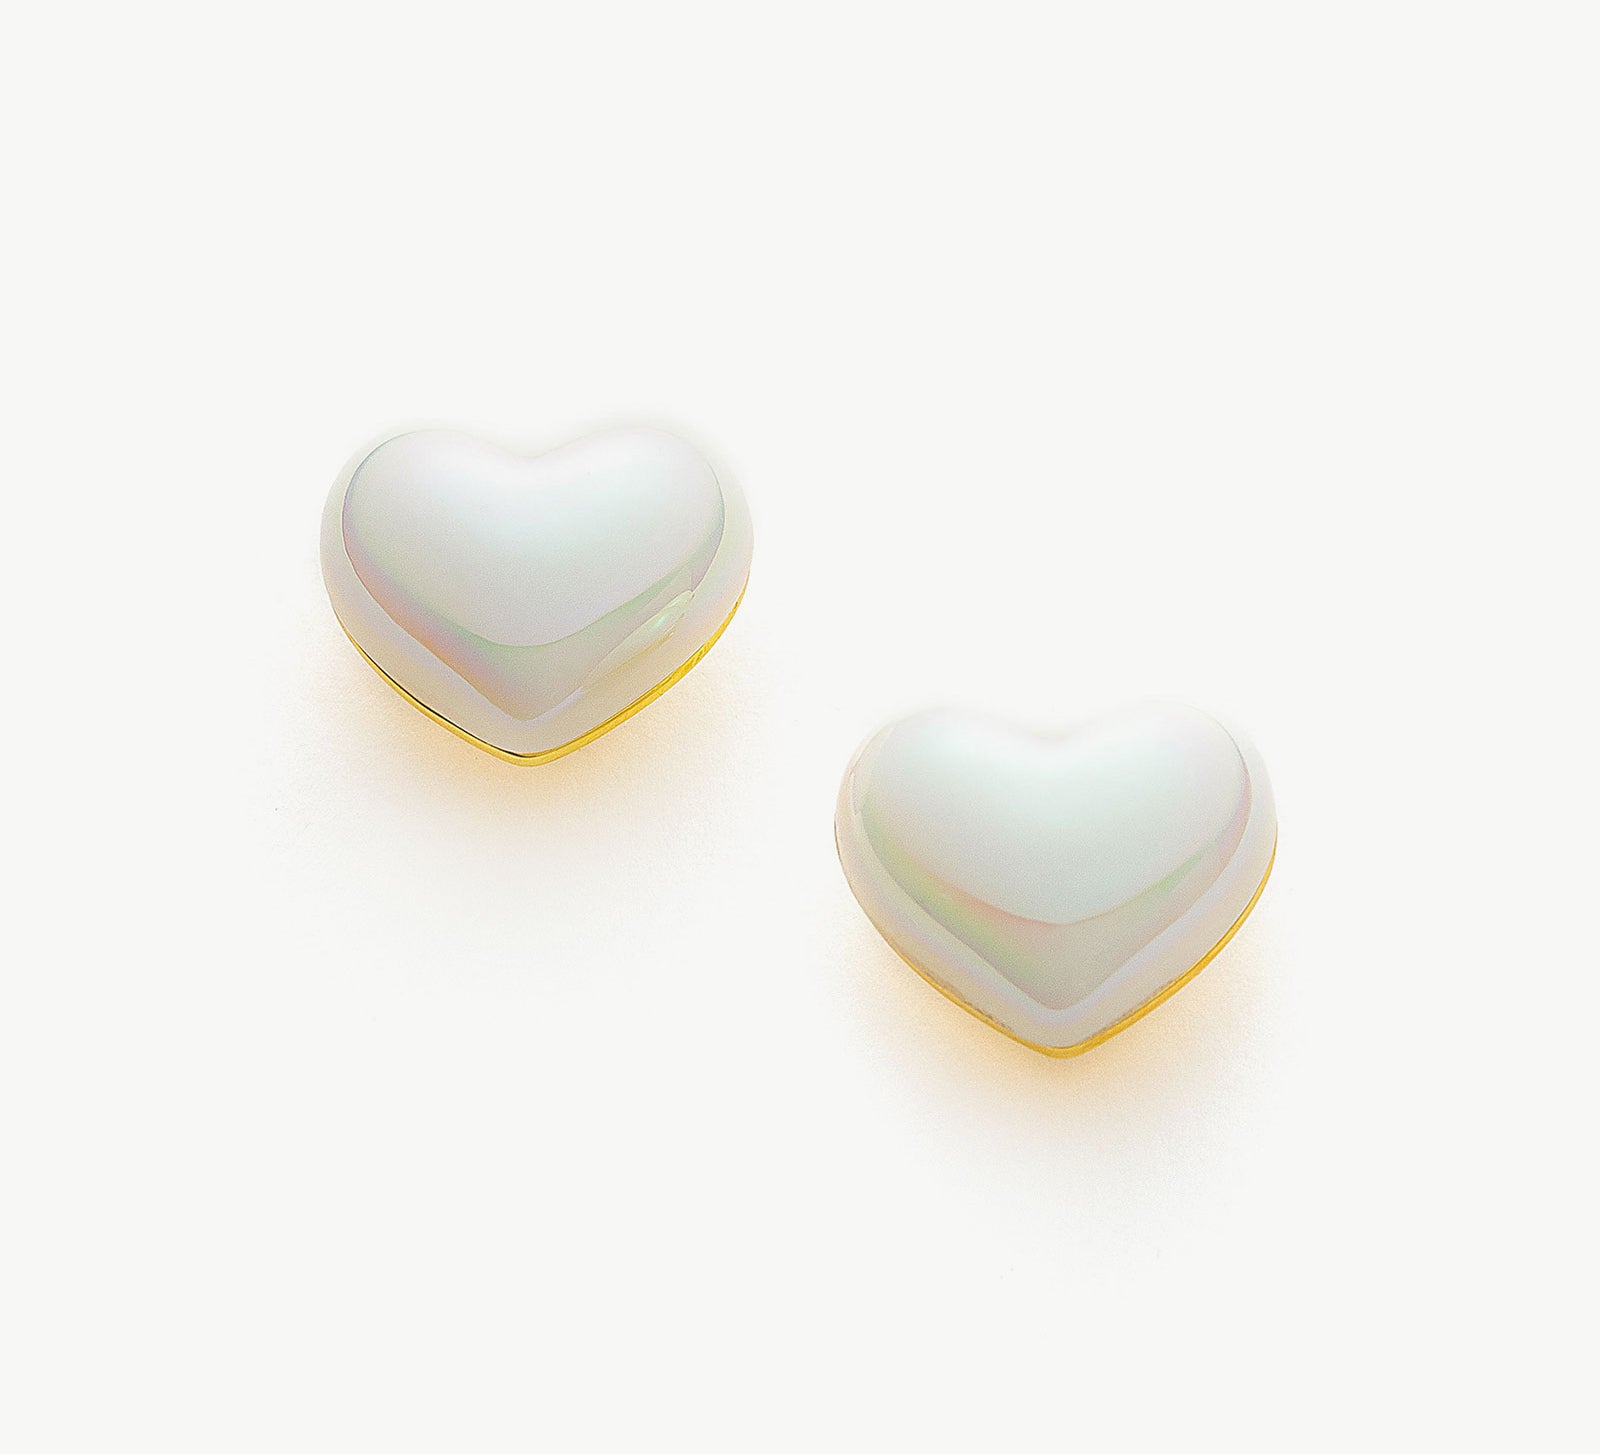 Heart-shaped Stud Earrings in a small size, perfect for adding a touch of romance without overwhelming your look